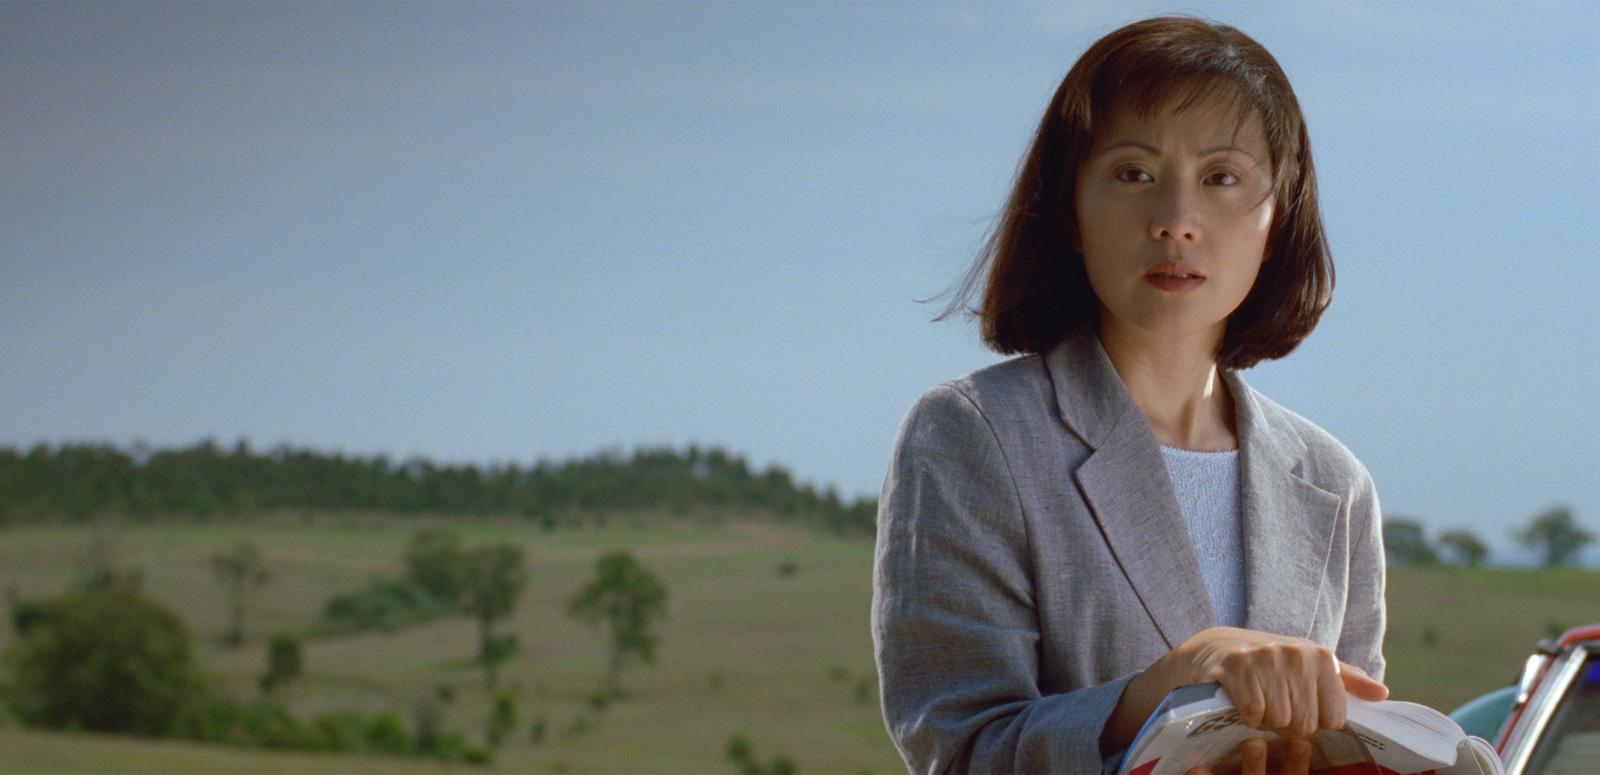 A young Asian woman dressed in a suit jacket pictured from the waist up in front of a green field and hills with trees in the background